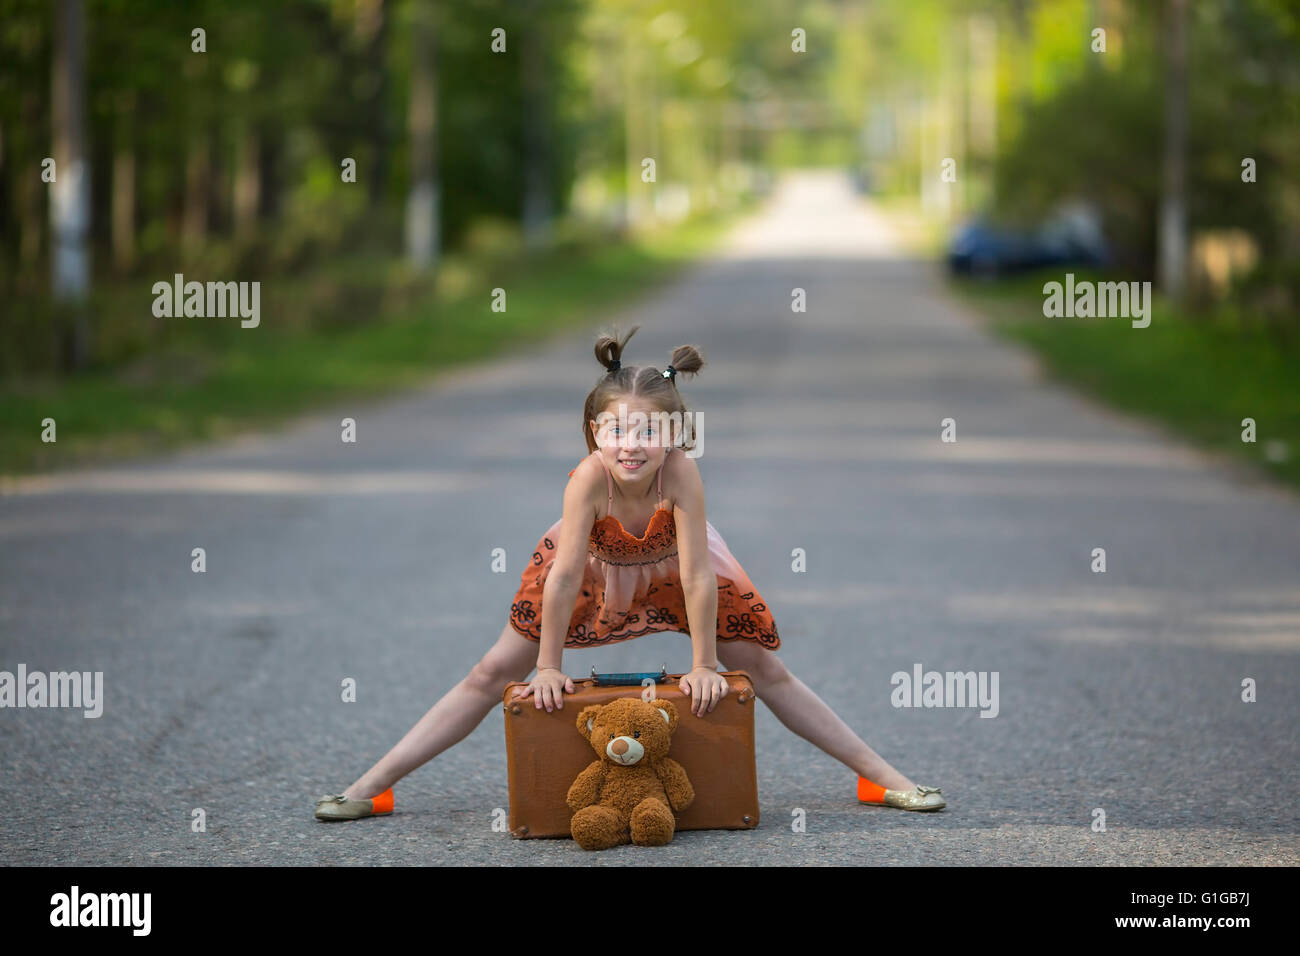 Funny little girl with a suitcase and teddy bear on the road. Stock Photo